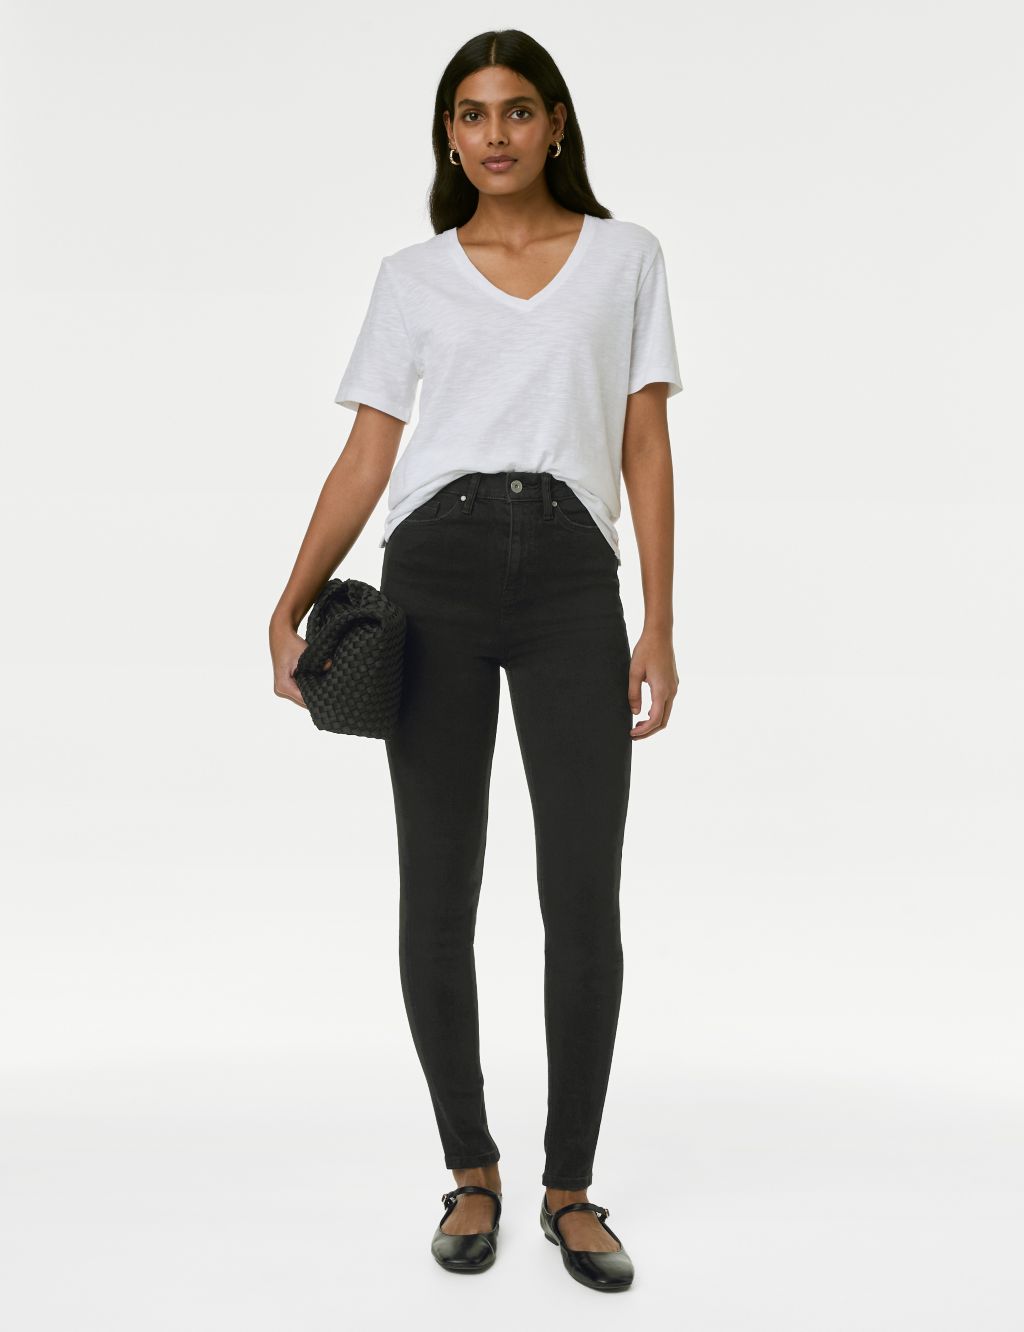 Ivy Supersoft High Waisted Skinny Jeans image 1